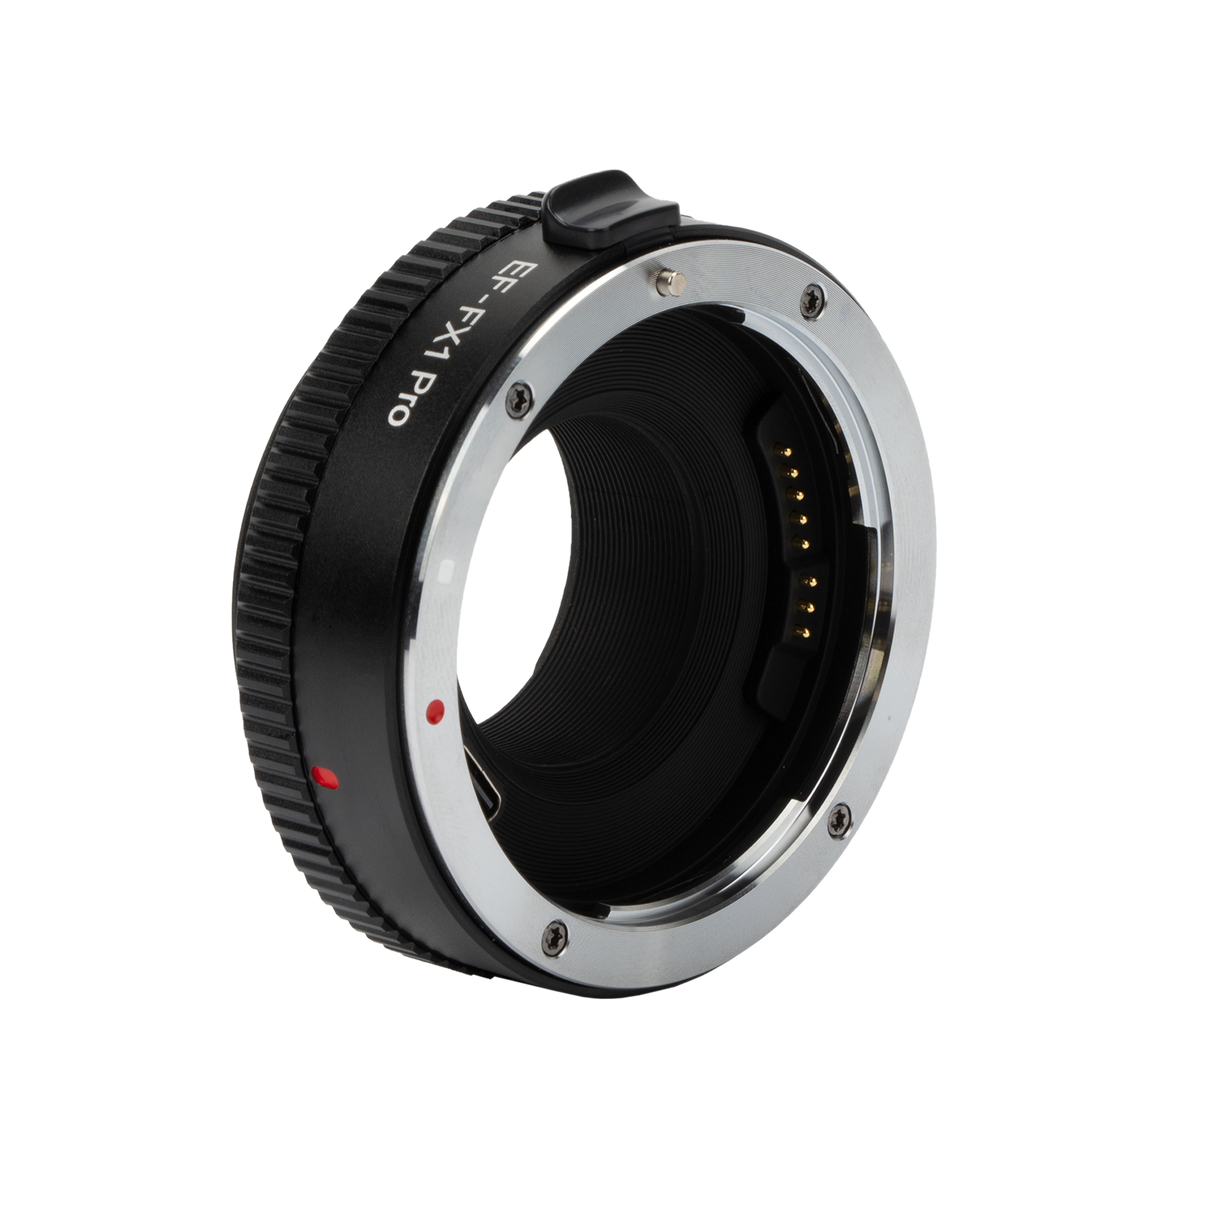 EF-FX1 Pro adapter for Canon EF/EF-S lenses to Fuji X mount